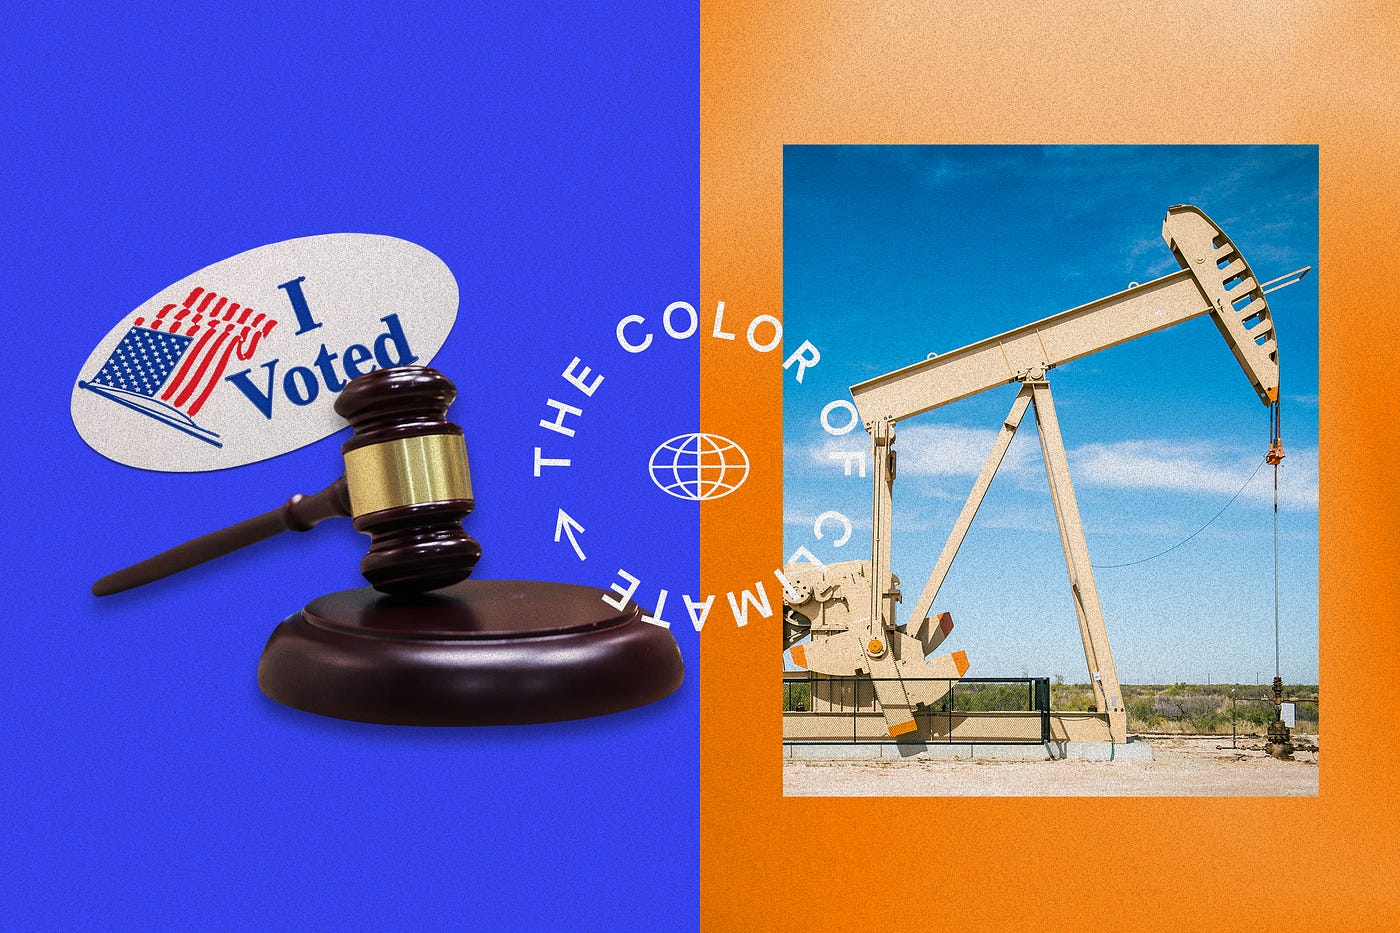 The text “The Color of Climate” is illustrated in a circle pattern  around a globe icon. Behind the text there are two images side-by-side — on the left is a gavel and an “I Voted” sticker, and on the right is an oil drilling machine.